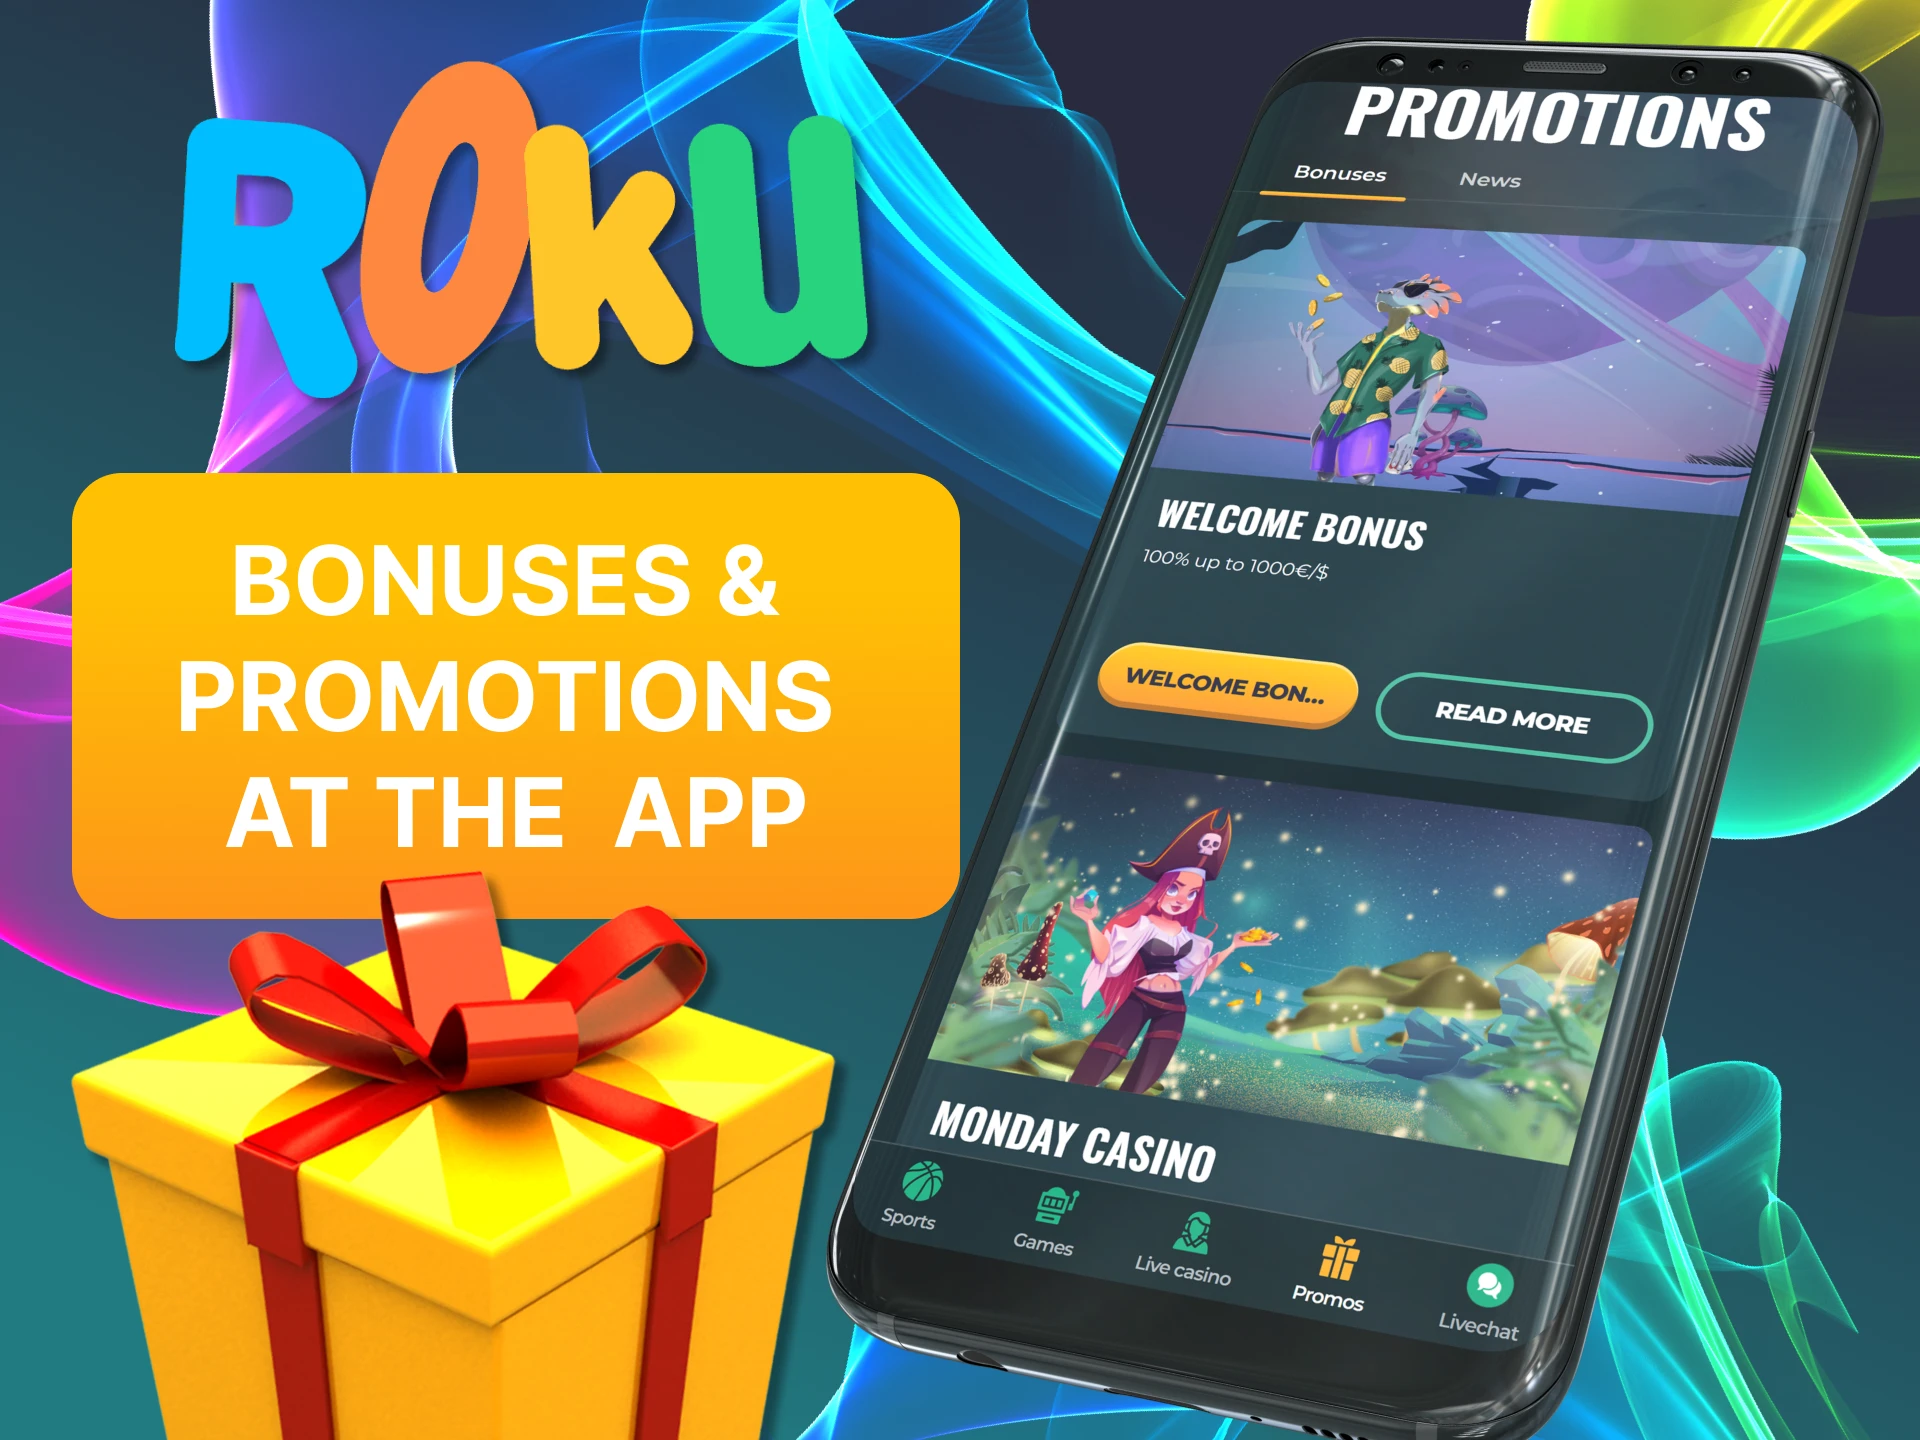 Bonuses from Rokubet are also available in the mobile app.